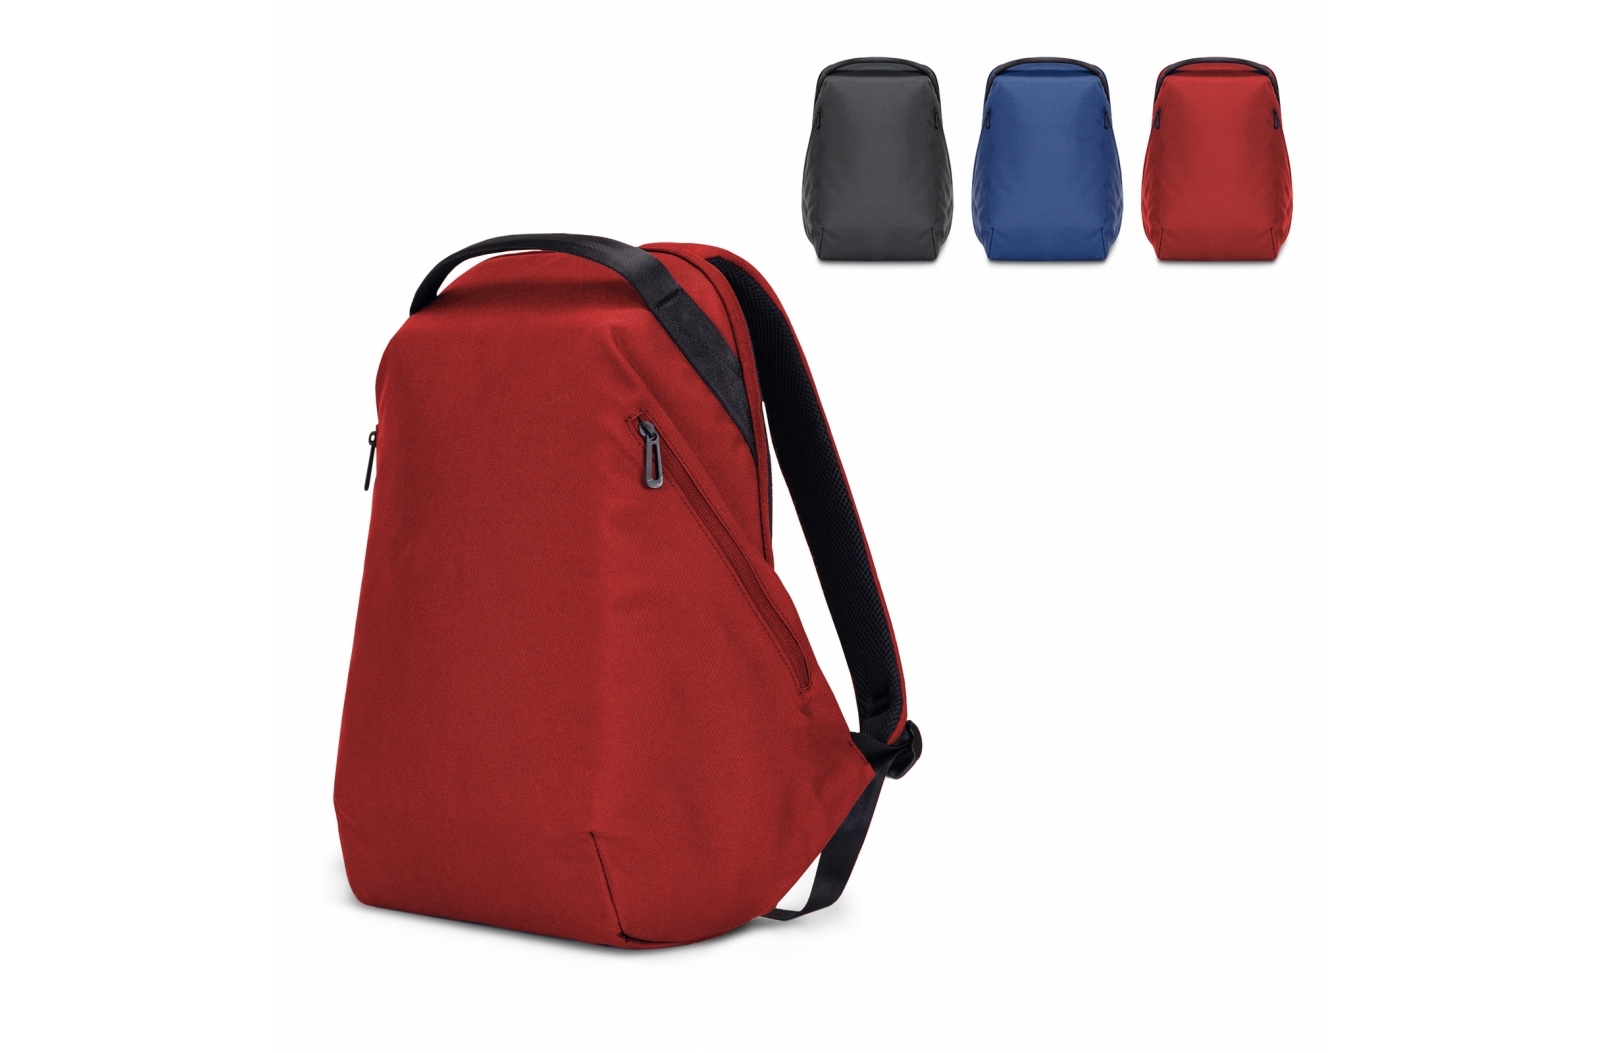 Anti-Theft Tech Backpack - Polebrook